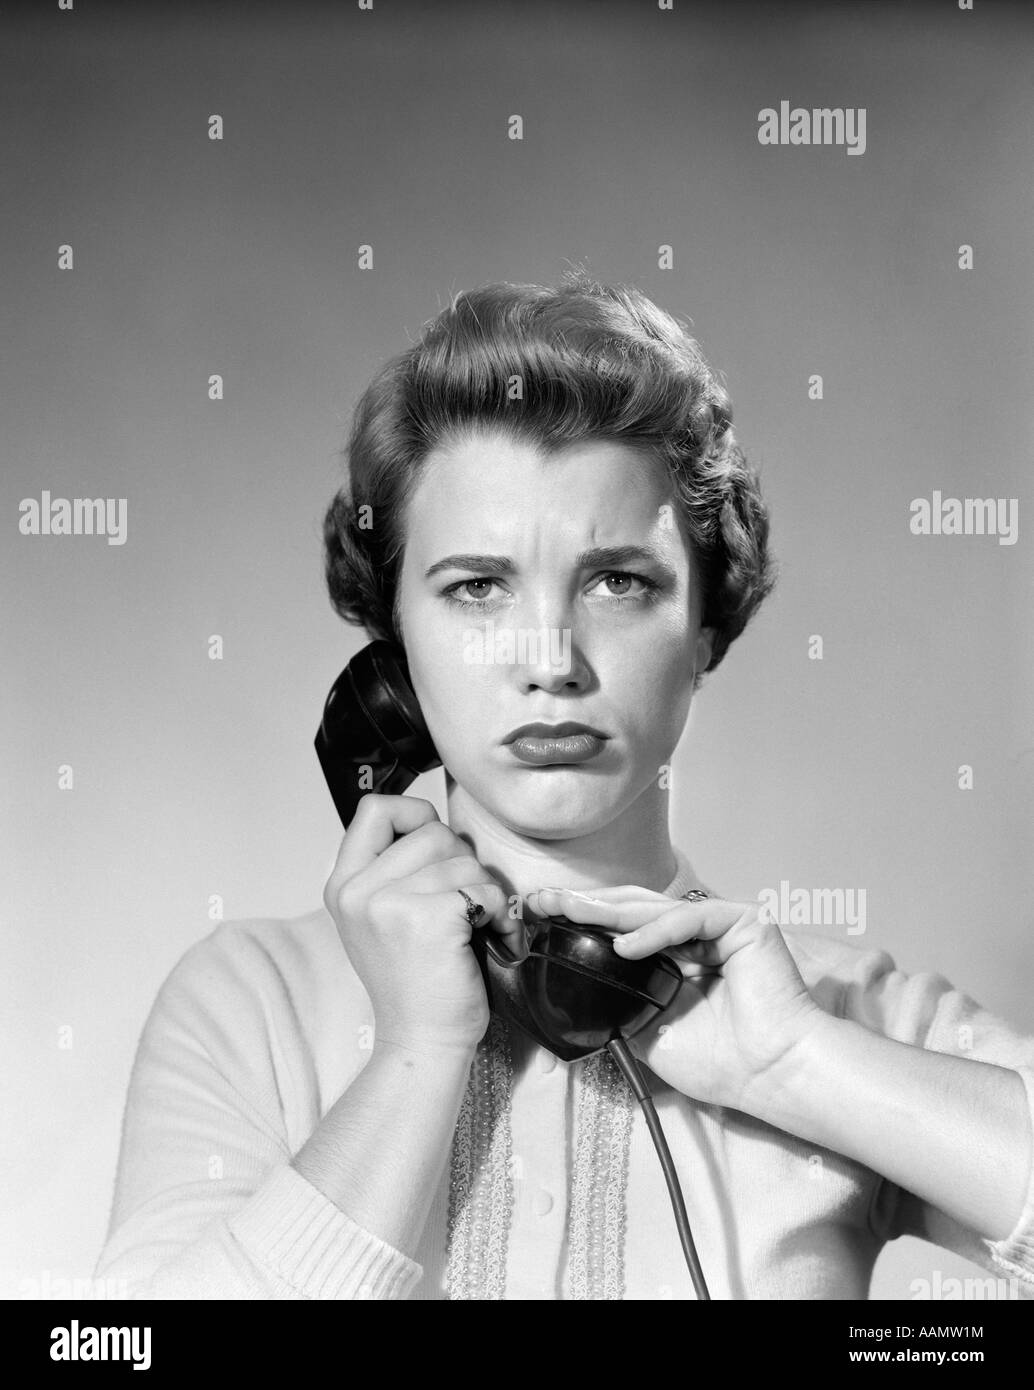 1950s WOMAN HOLDING RECEIVER HAND OVER RECEIVER LOOKING AT CAMERA WITH ANNOYED ANGRY EXPRESSION Stock Photo